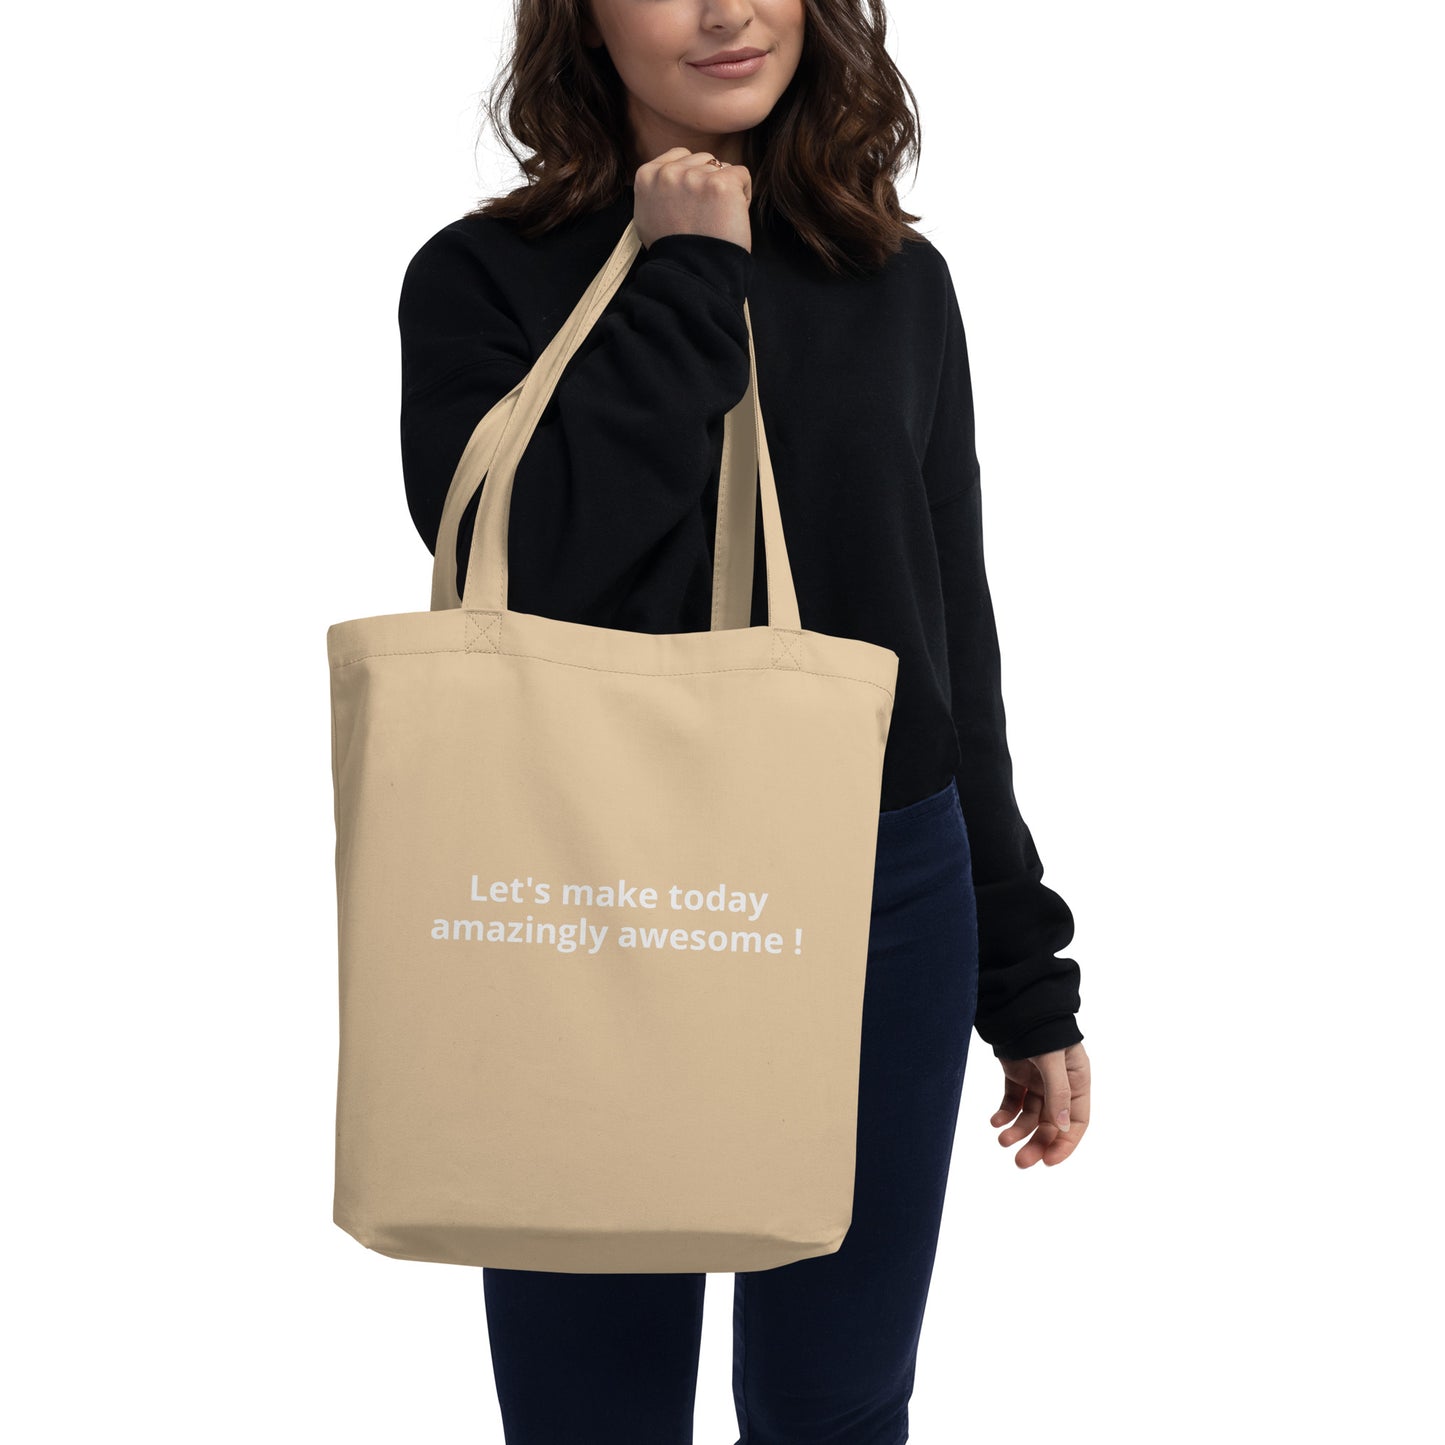 Let's make today amazingly awesome ! - Eco Tote Bag